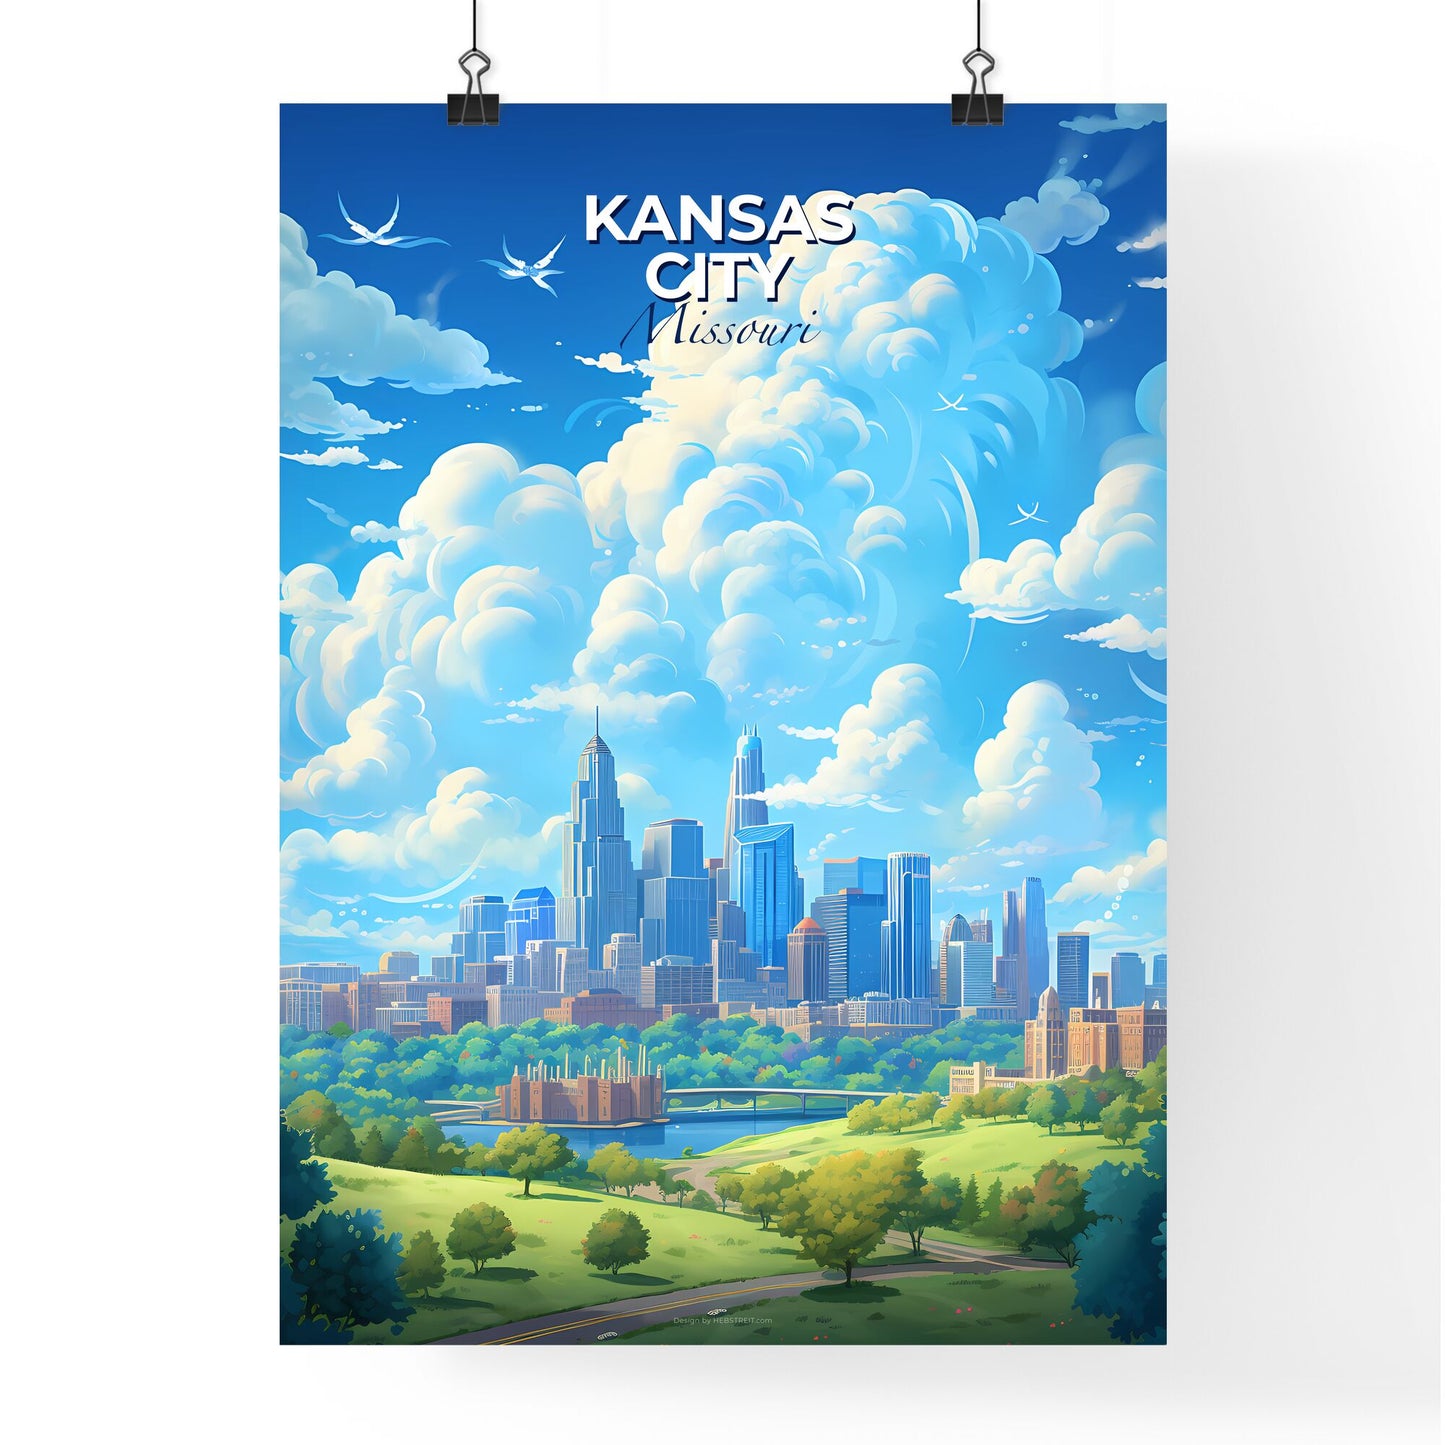 Kansas City Missouri Skyline - A Landscape Of A City With A River And Clouds In The Sky - Customizable Travel Gift Default Title